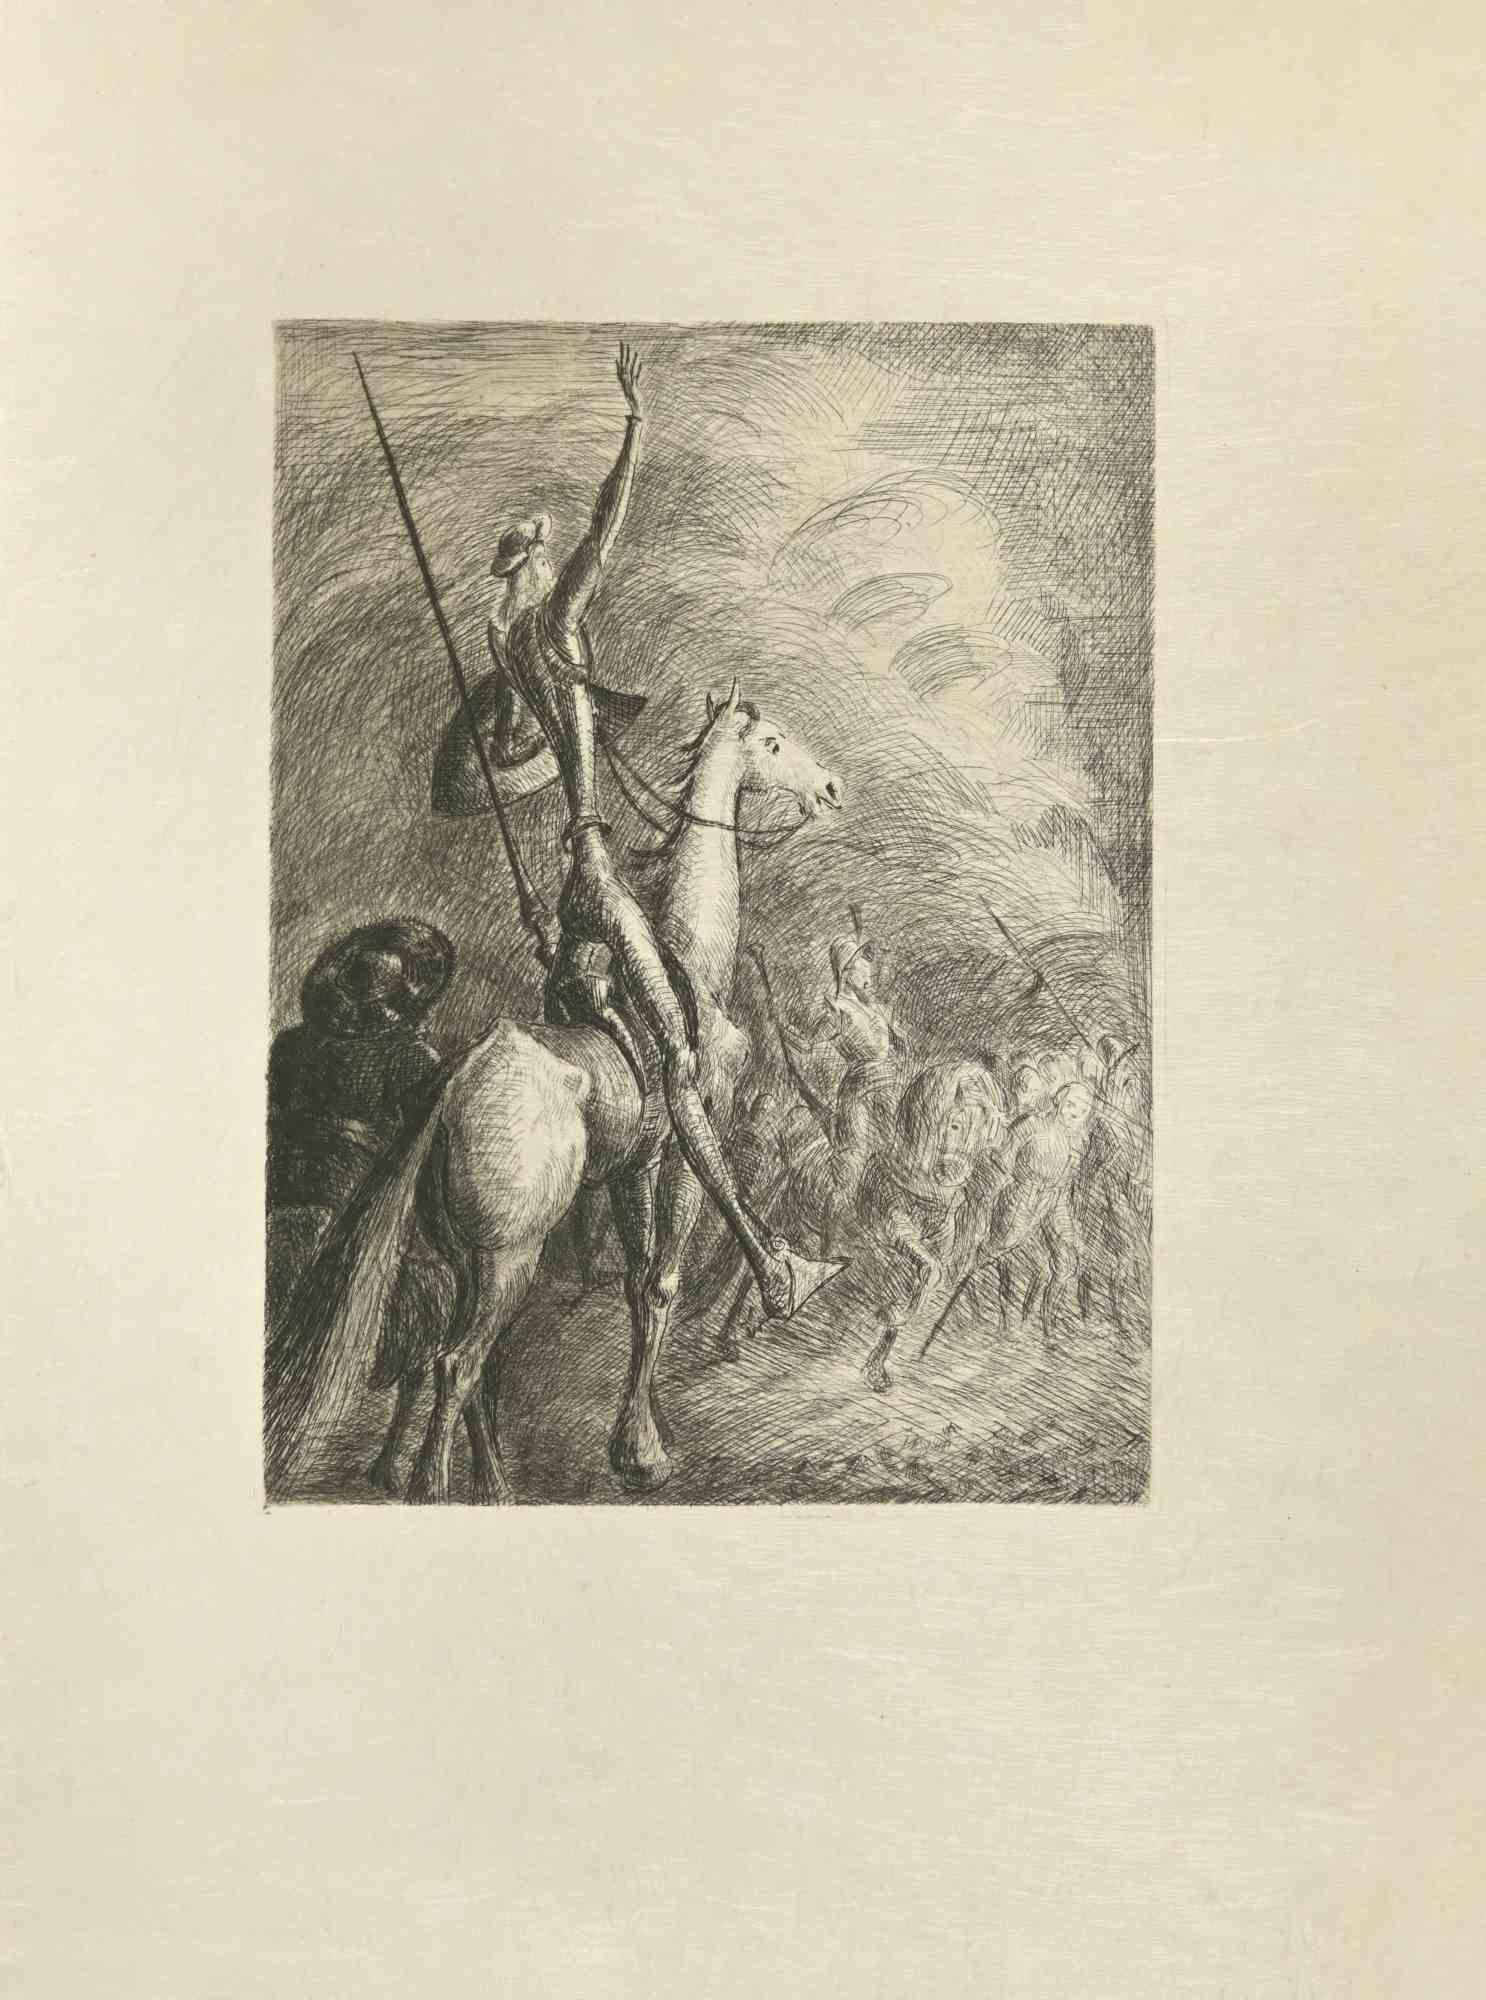 Don Quixote On Battle is an etching and drypoint print on ivory-colored Japanese paper, realized by Wladyslaw Jahl in 1951.

It belongs to a limited edition of 125 specimens.

Good conditions.

The artwork represents a visual scene from Don Quixote